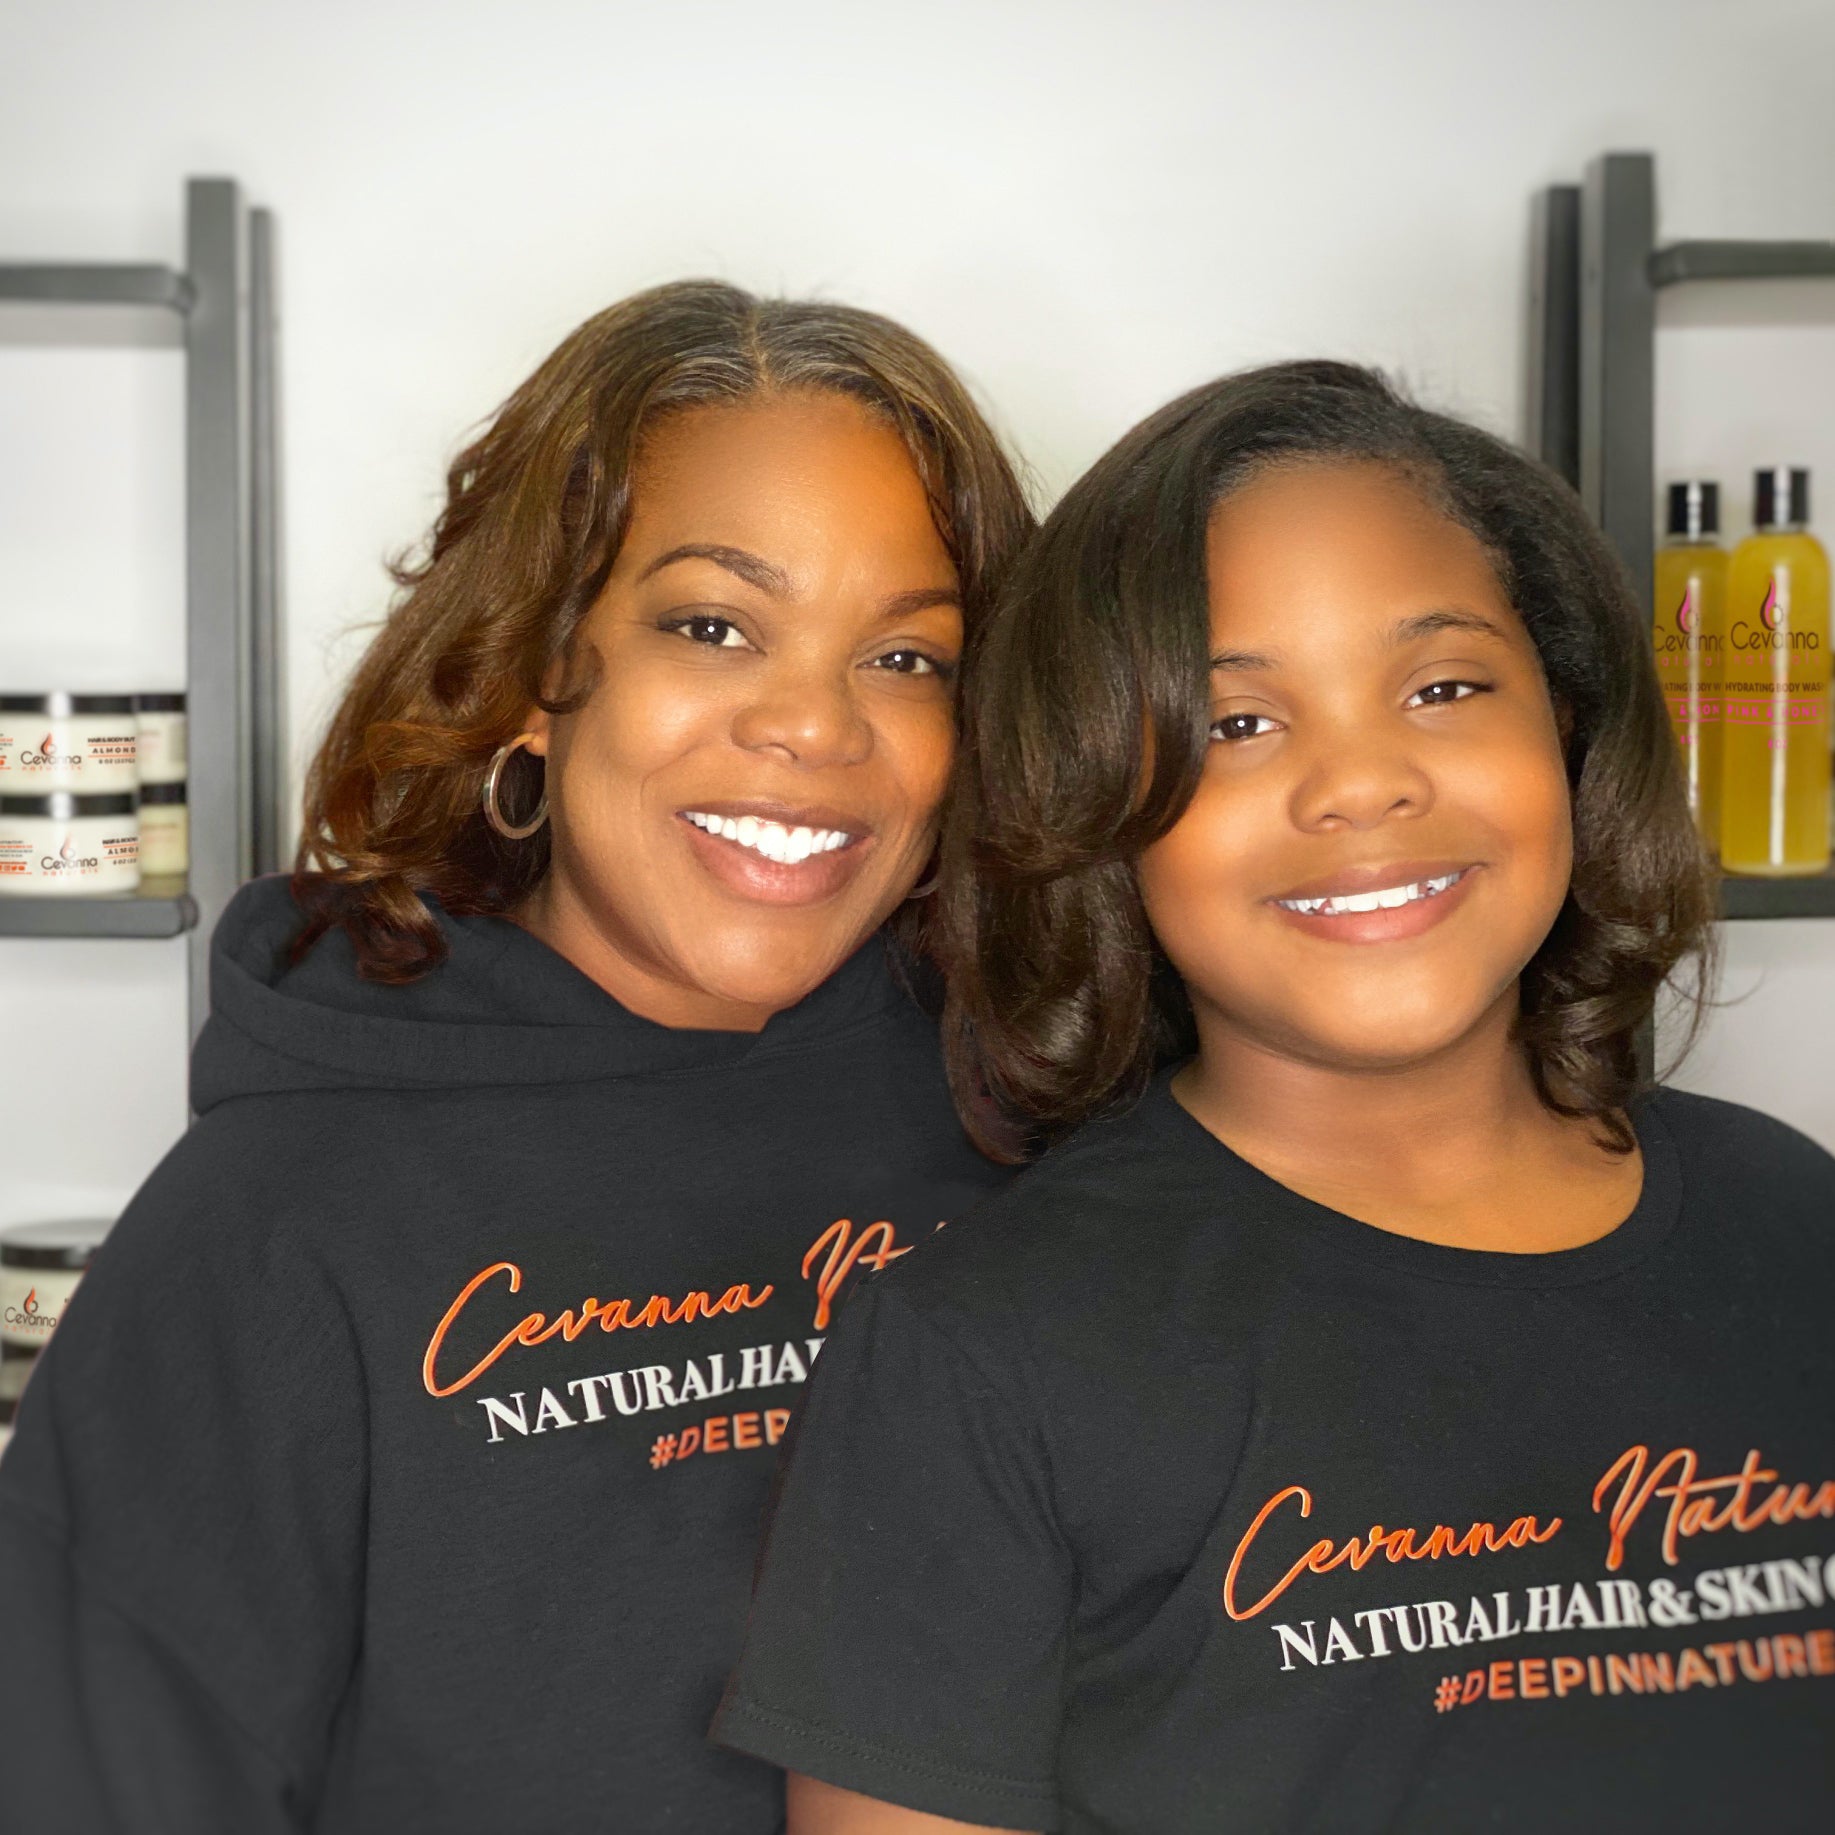 Cevanna Naturals Ceo and Co-Founder